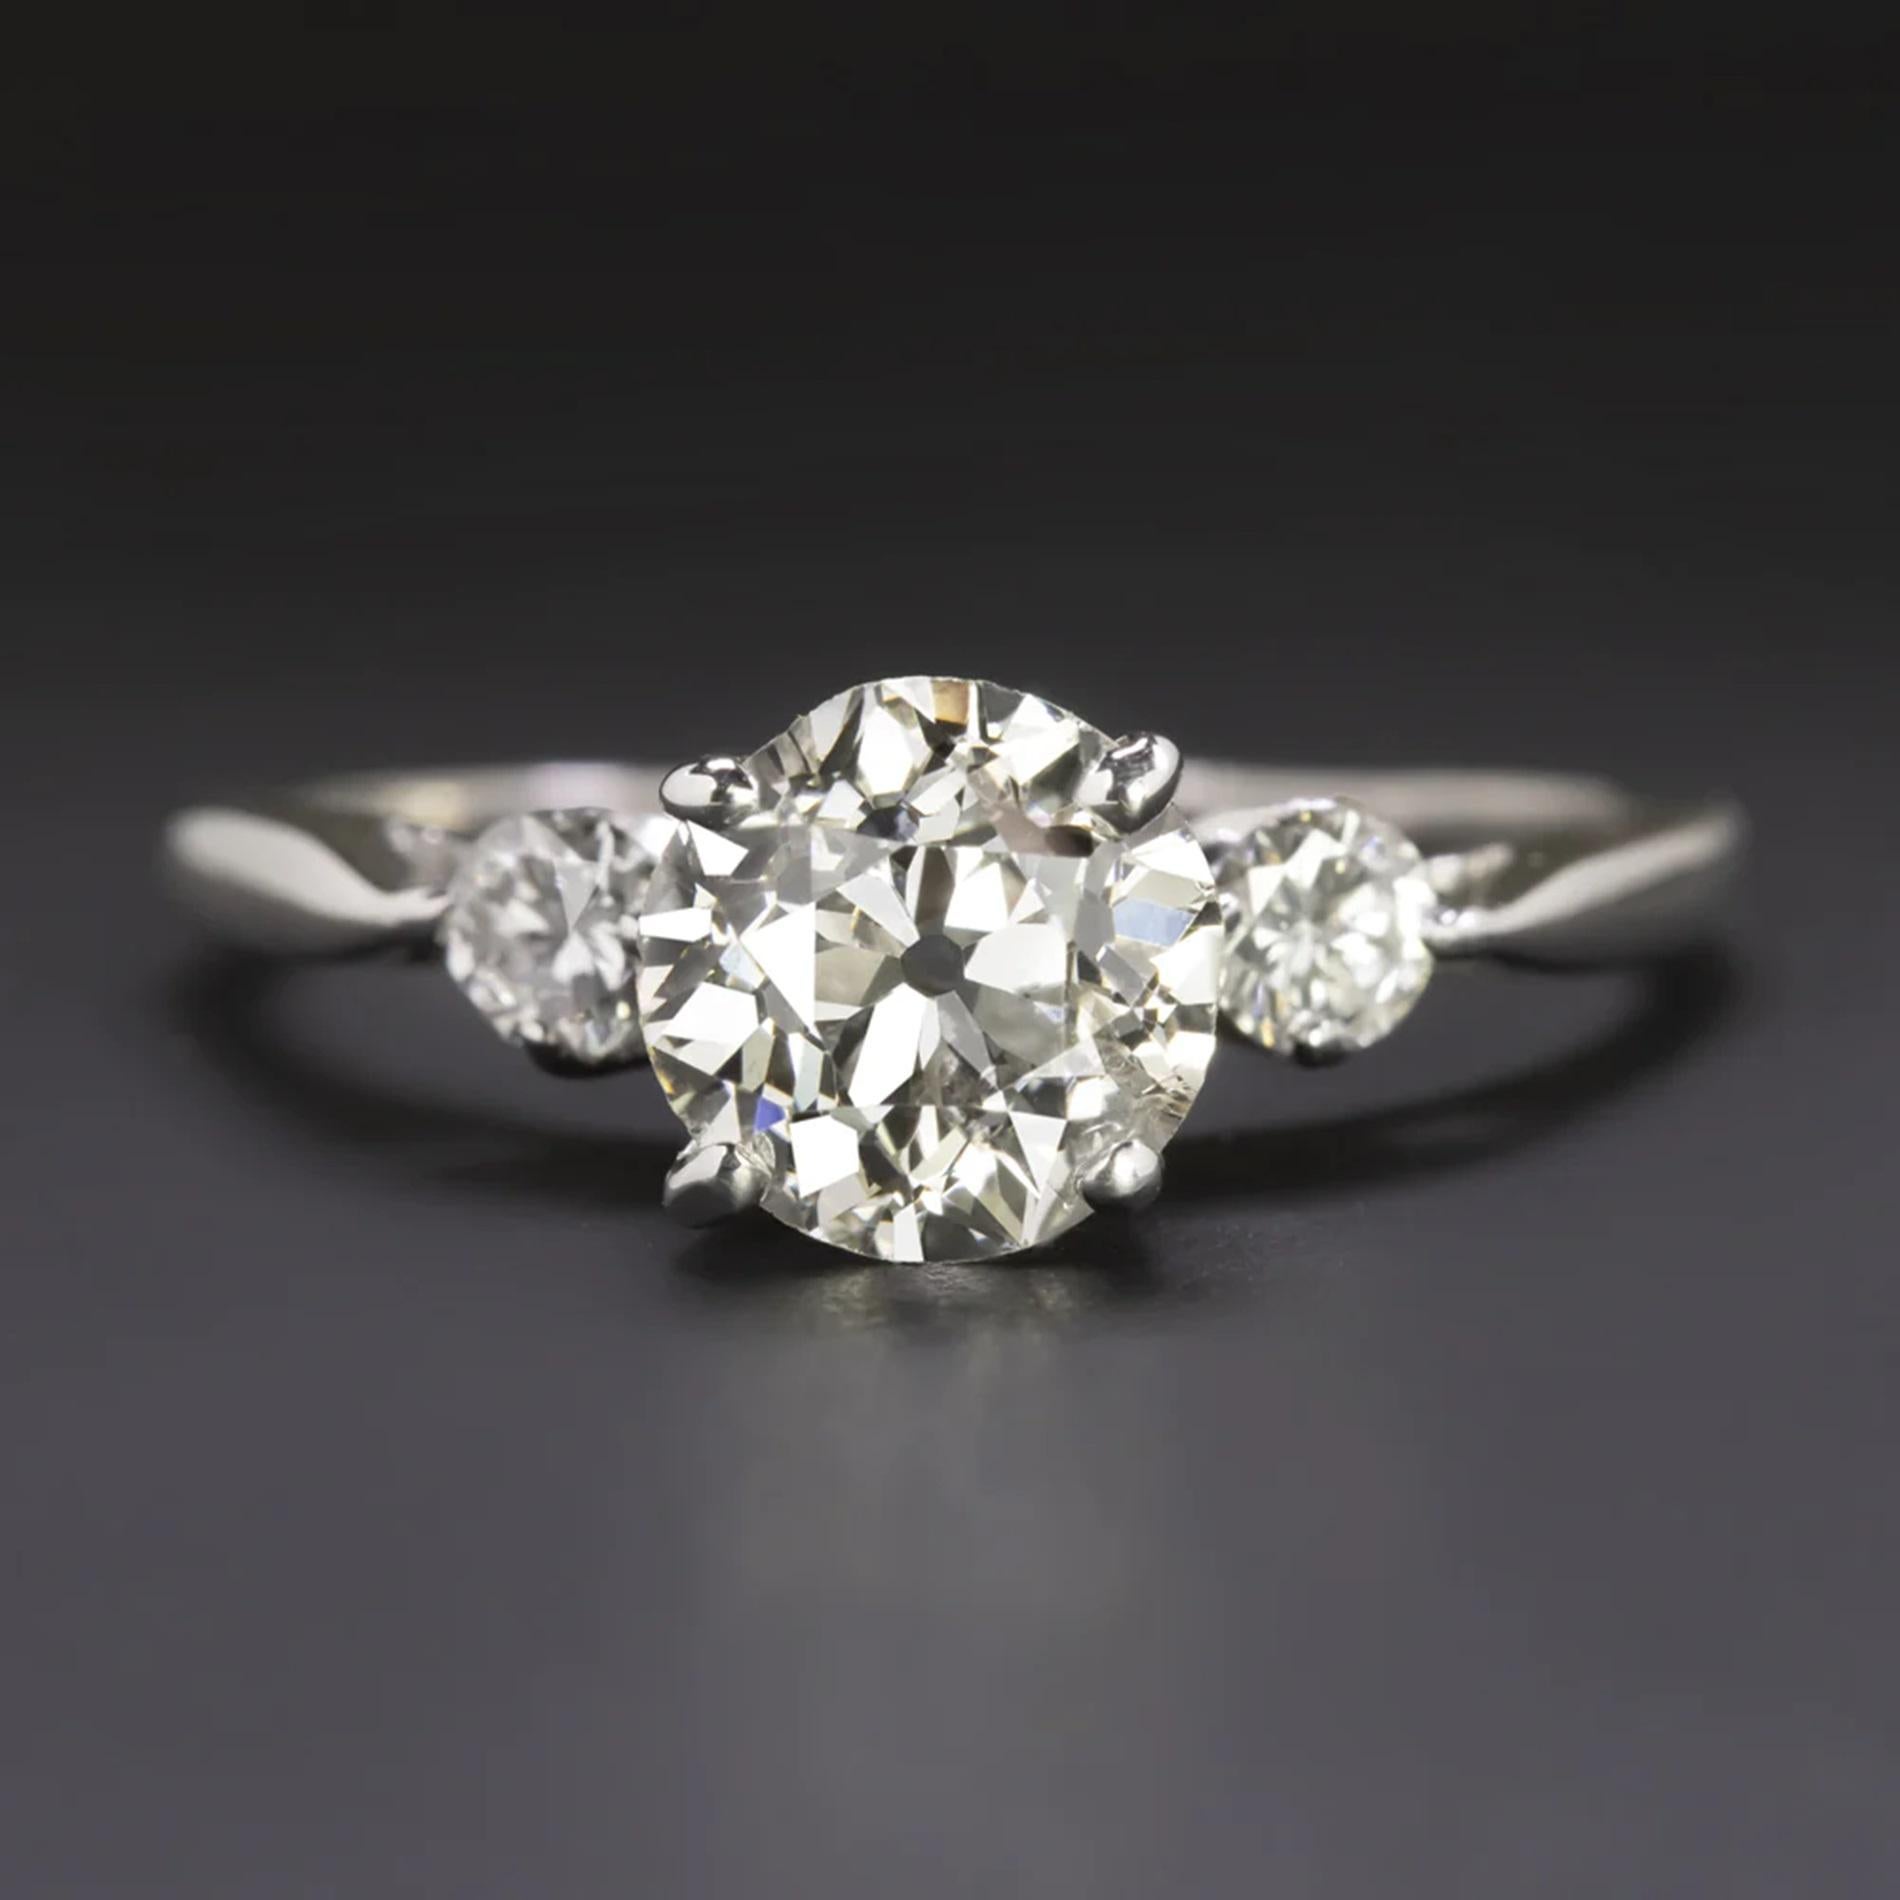 original vintage engagement ring showcases a 1.43ct old European cut diamond in a classic setting with diamond accented shoulders and vintage details that add charm without clutter.

Highlights:

- Original vintage

- 1.43ct center diamond with a